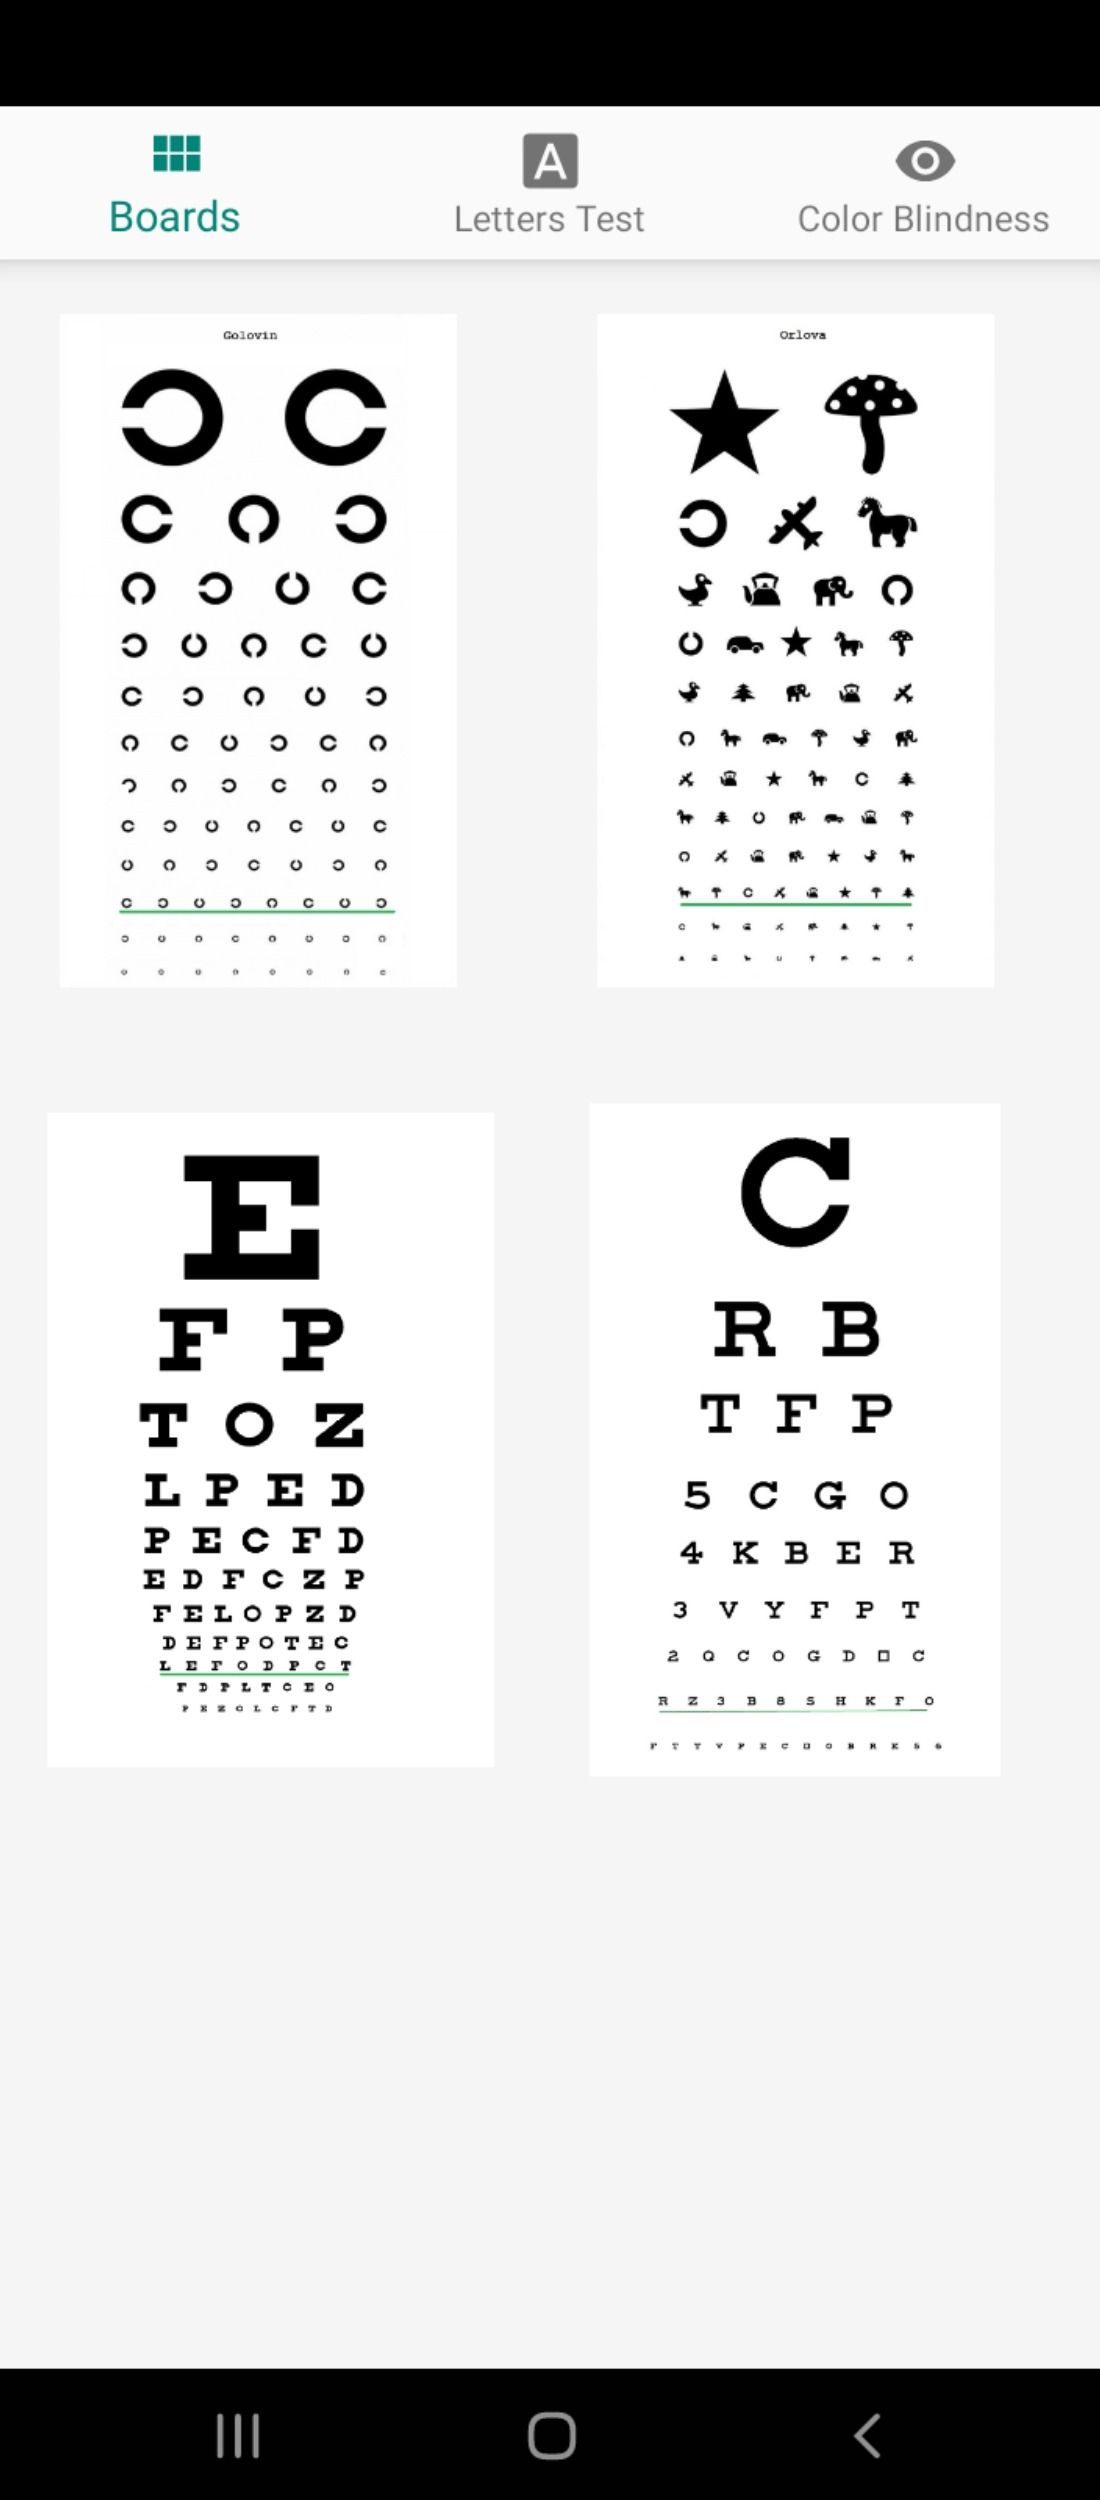 Snellen charts for testing visual acuity